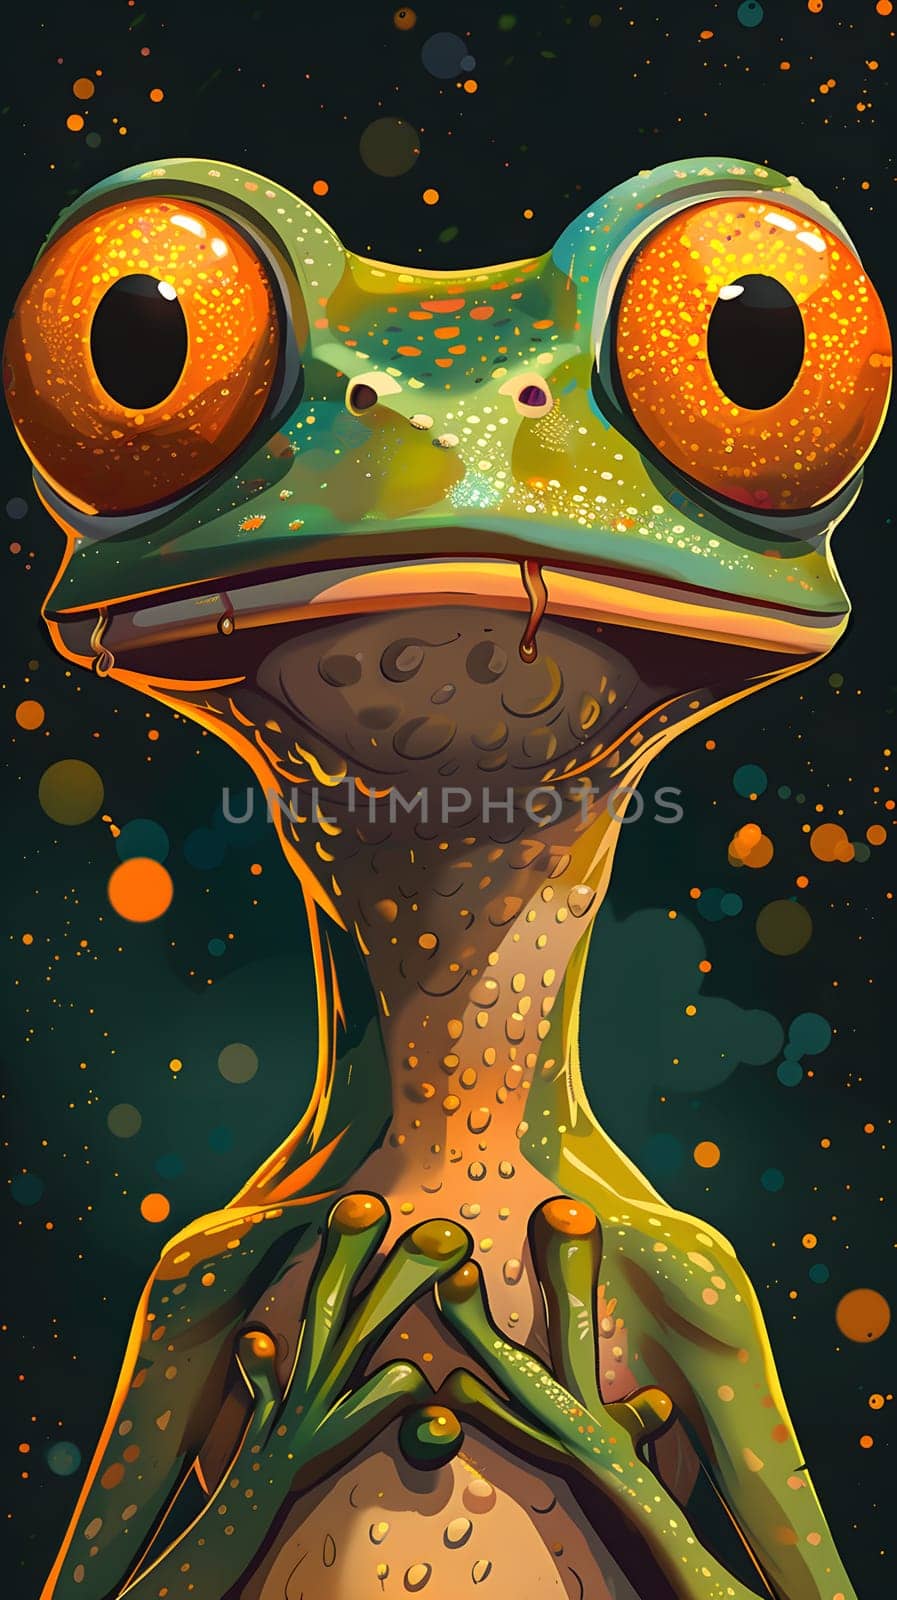 A green true frog with large orange eyes gazes into the camera by Nadtochiy